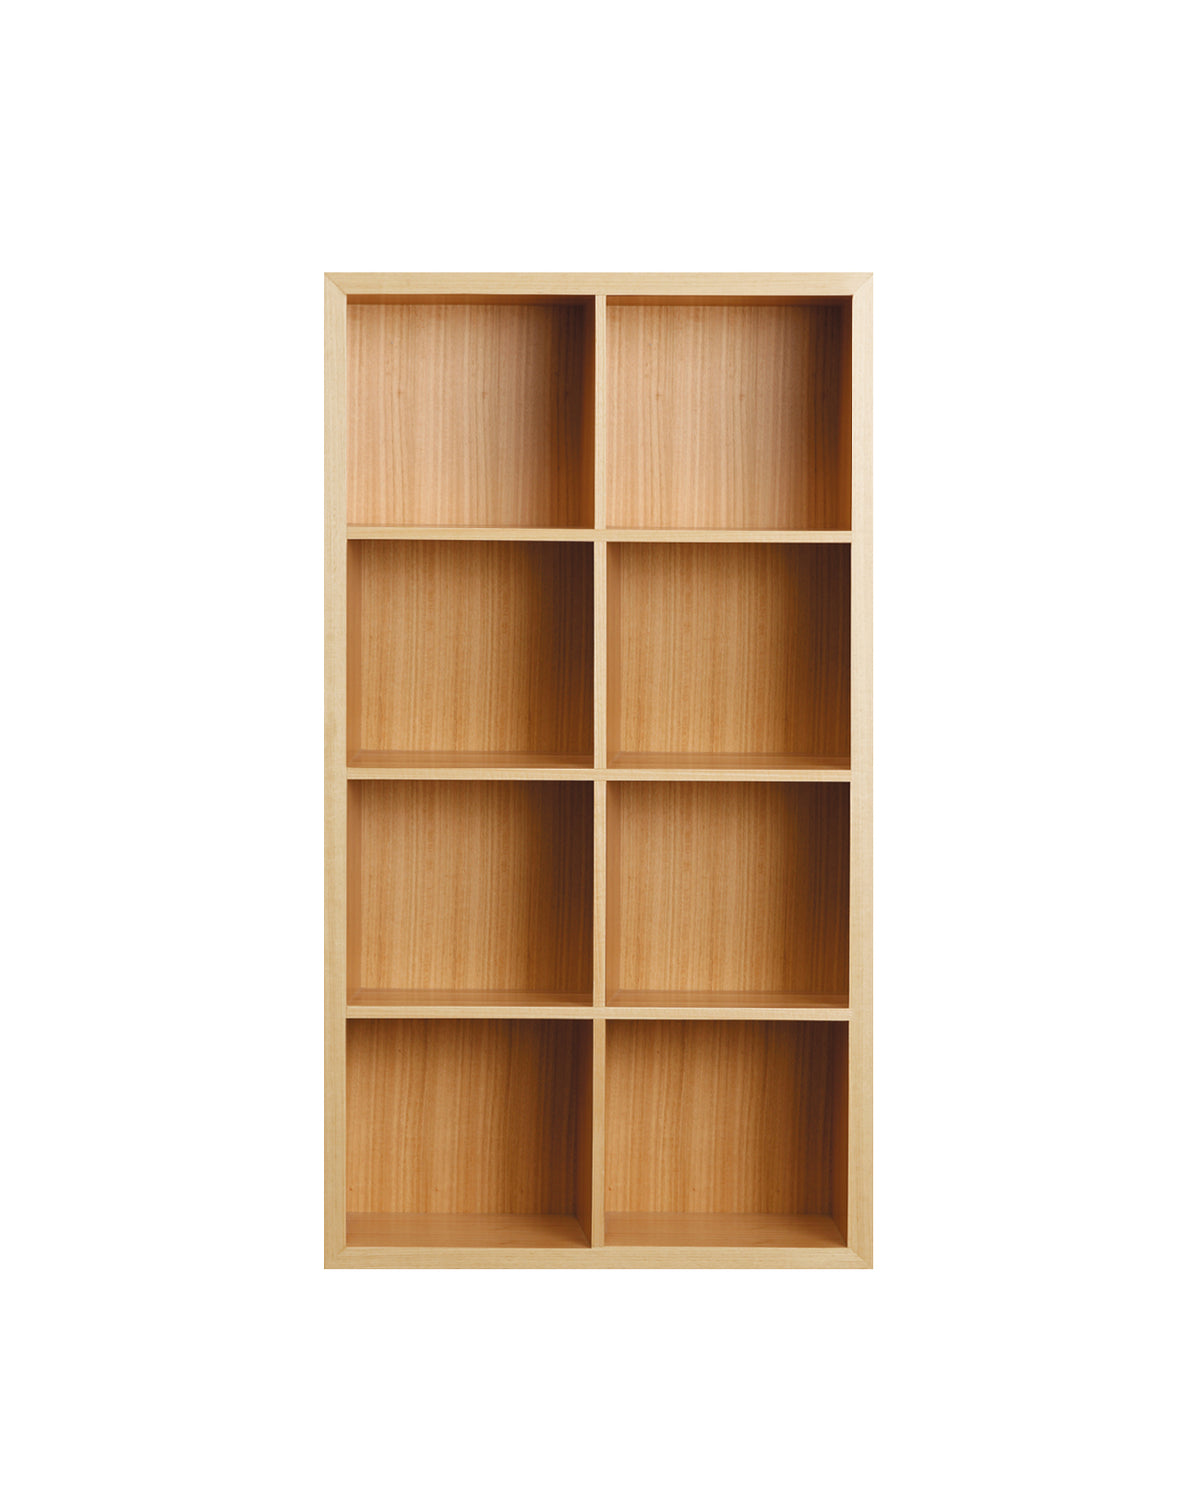 Scoop Bookcase Shell is an open bookcase with open cavities to display books and treasures. The shell frame conceals intricate mitred joinery. To add more storage options, add on interchangeable felt storage boxes.  Timber sourced from sustainably managed forests. Lead-times may vary from 6-14 weeks (contact our showroom). Timber swatches available on request.  140H x 30D x 112W cm